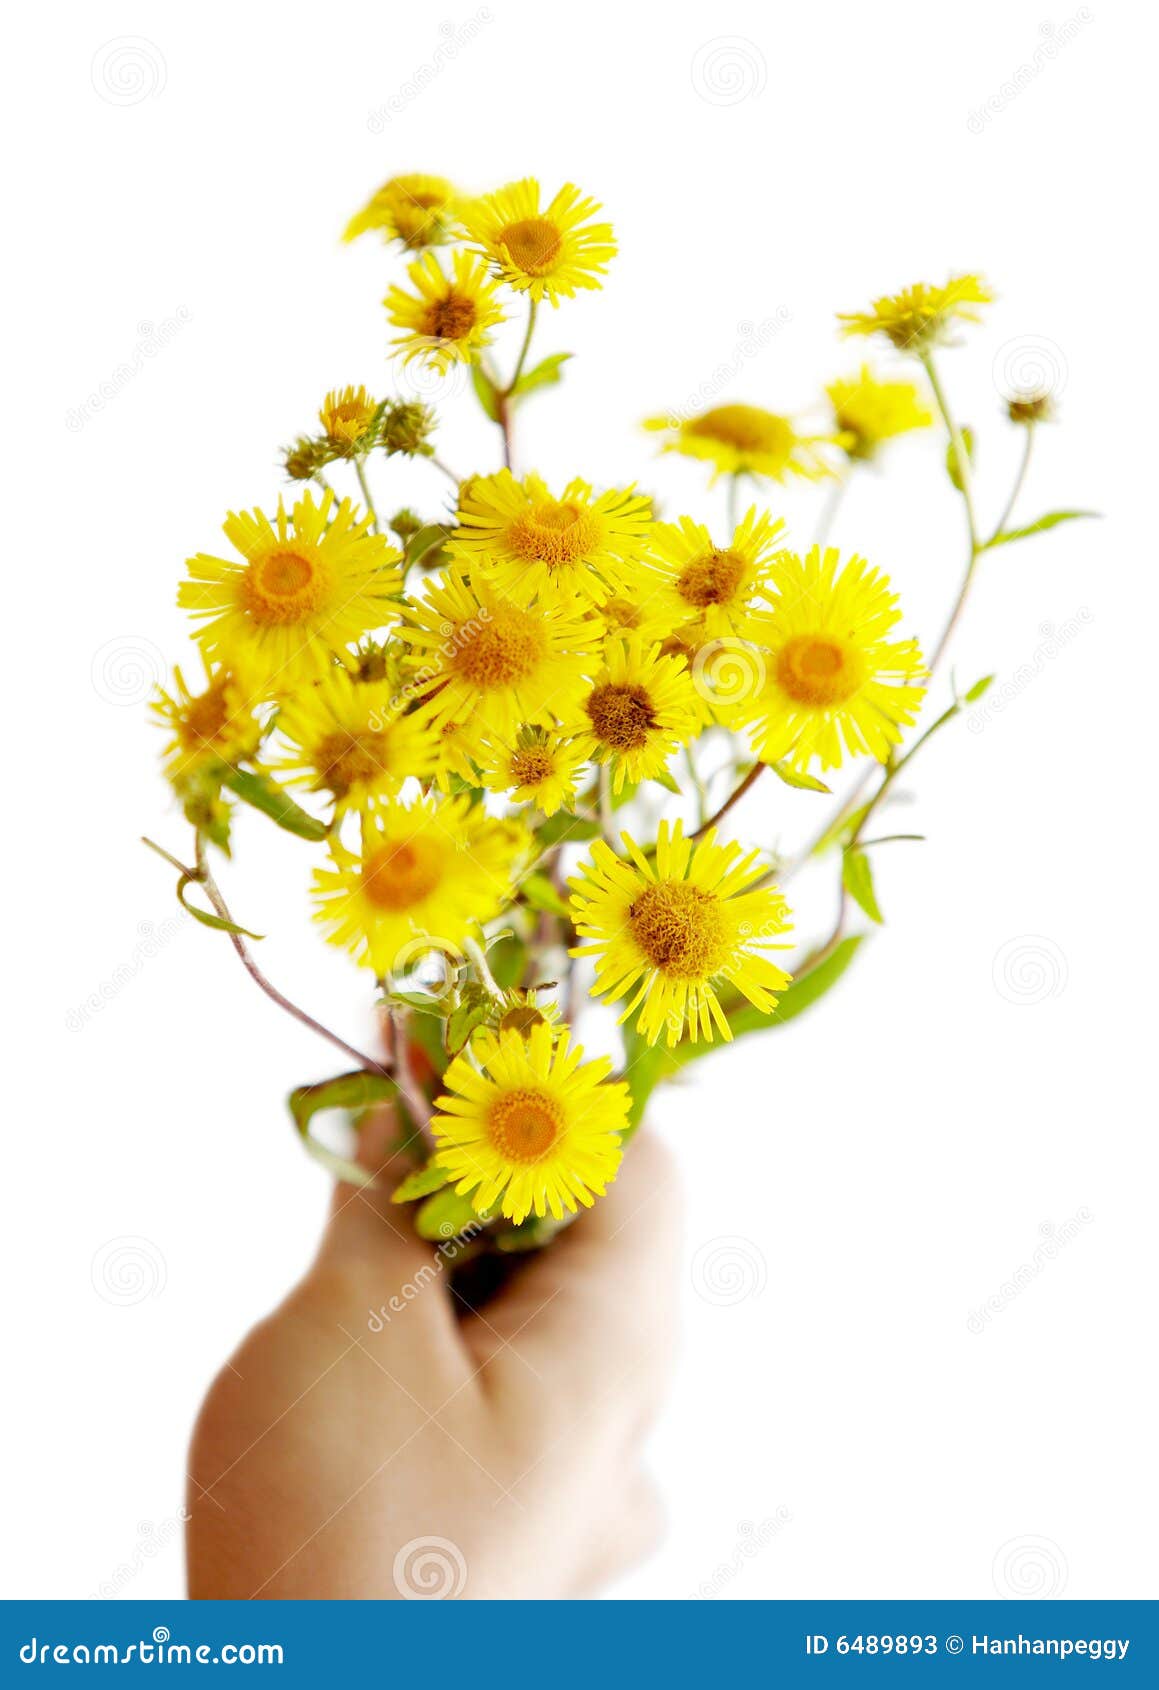 Daisy for you stock image. Image of flowers, daisy, hand - 6489893